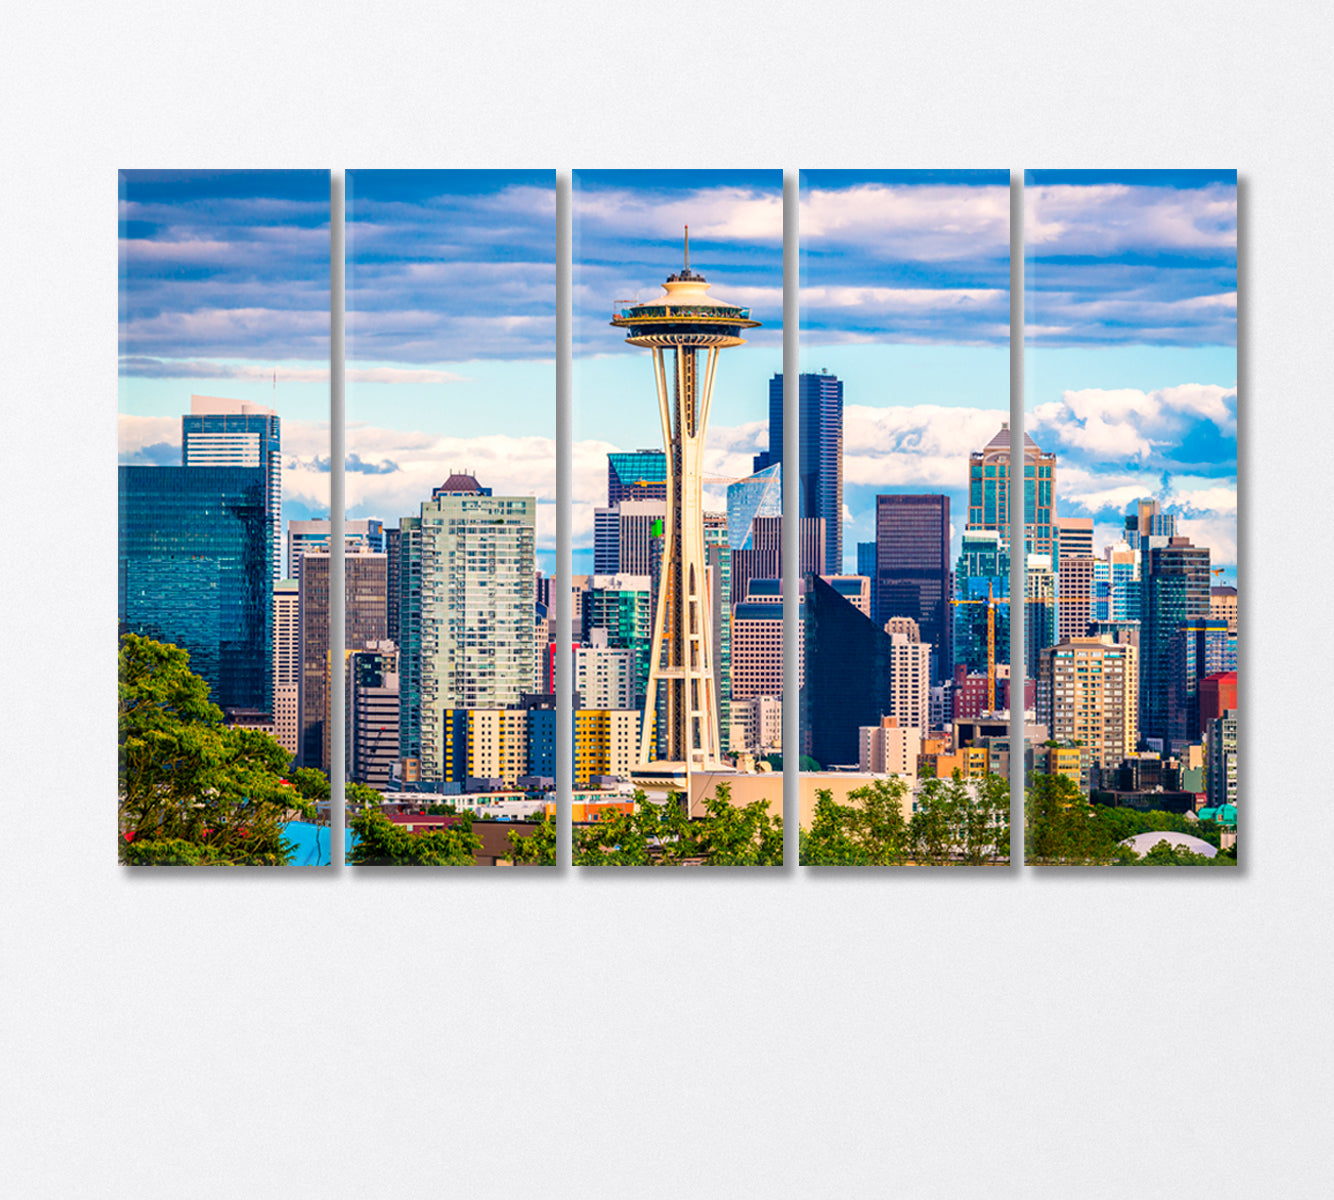 Space Needle Tower in Seattle Washington State USA Canvas Print-Canvas Print-CetArt-5 Panels-36x24 inches-CetArt